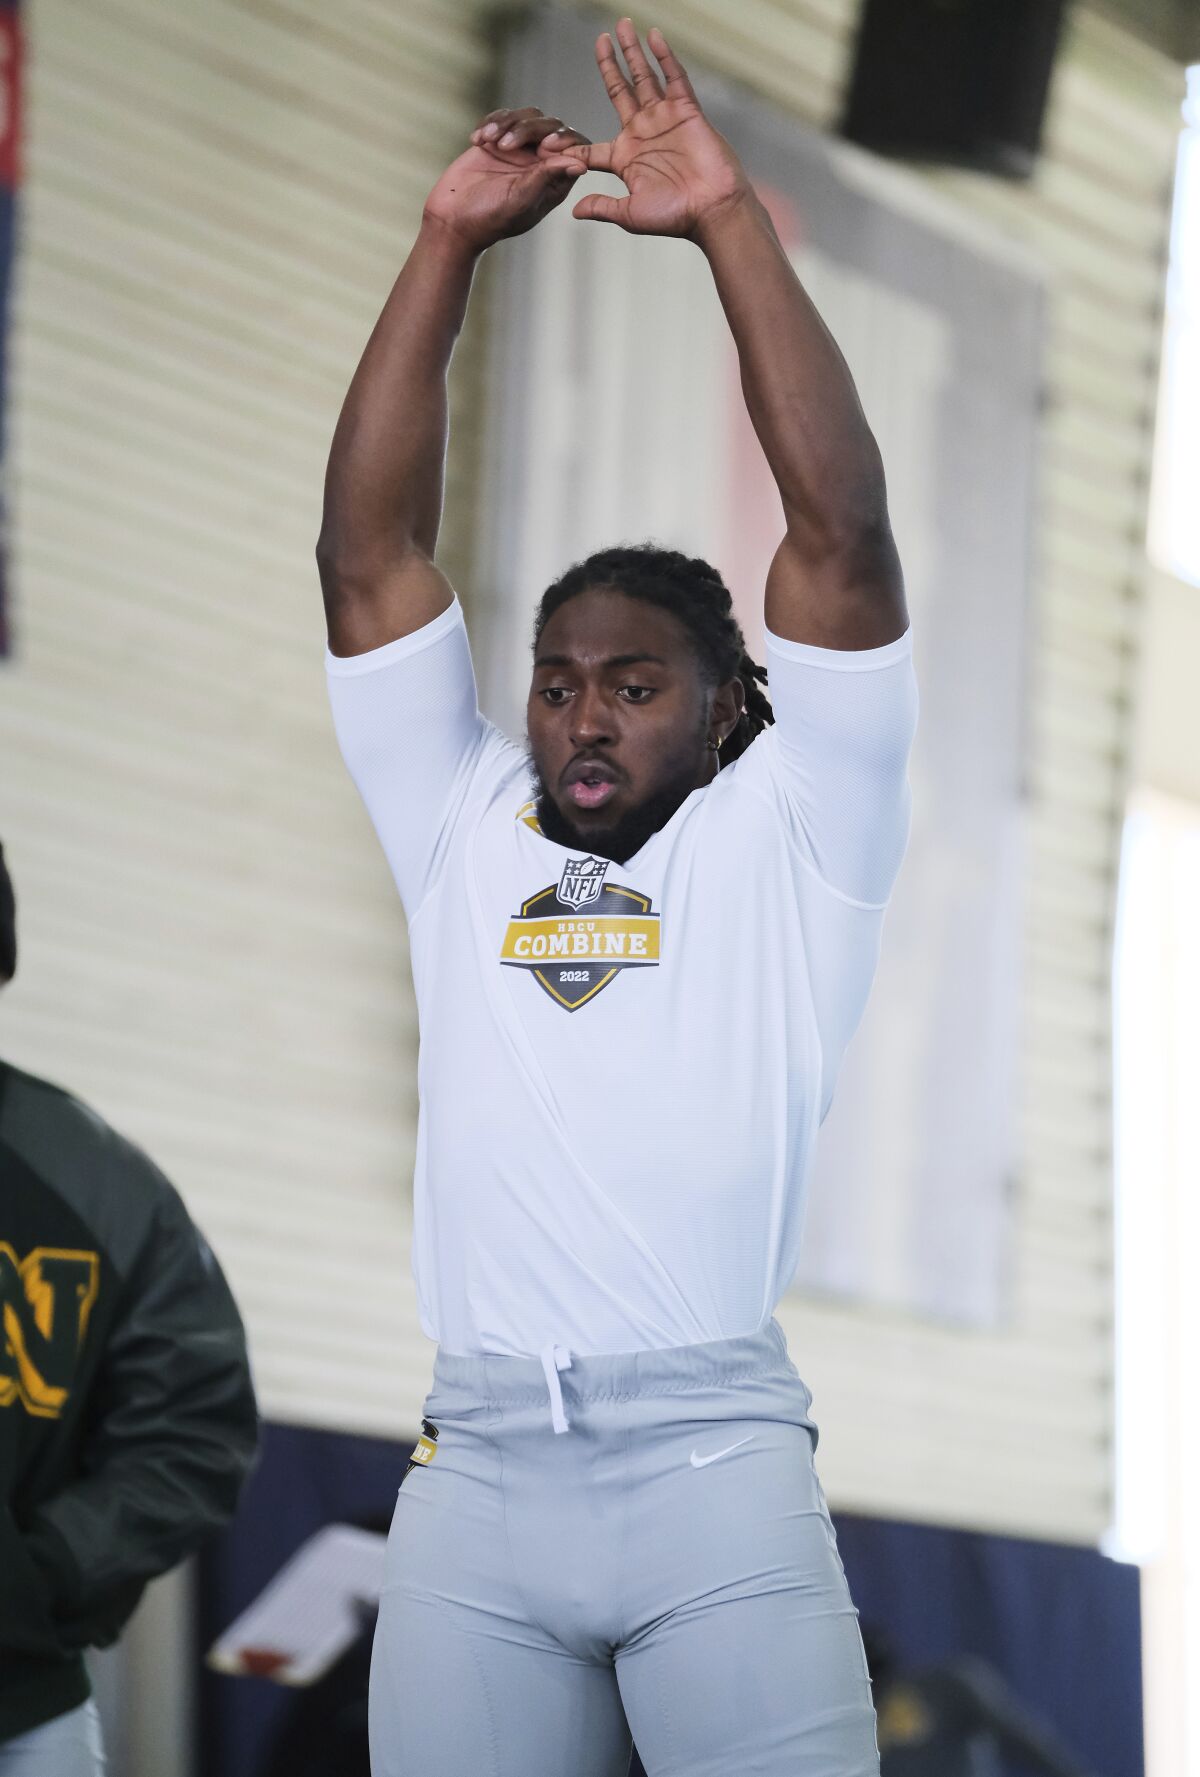 Alabama State running back Ezra Gray stretches out before doing a broad jump at the NFL HBCU Combine at the University of South Alabama in Mobile, Ala. on Saturday, Jan. 29, 2022. Nearly a year after no HBCU players were selected in the NFL Draft, Gray and other products of of historically black colleges and universities have somethig to prove. (Dan Anderson/AP Images for NFL)